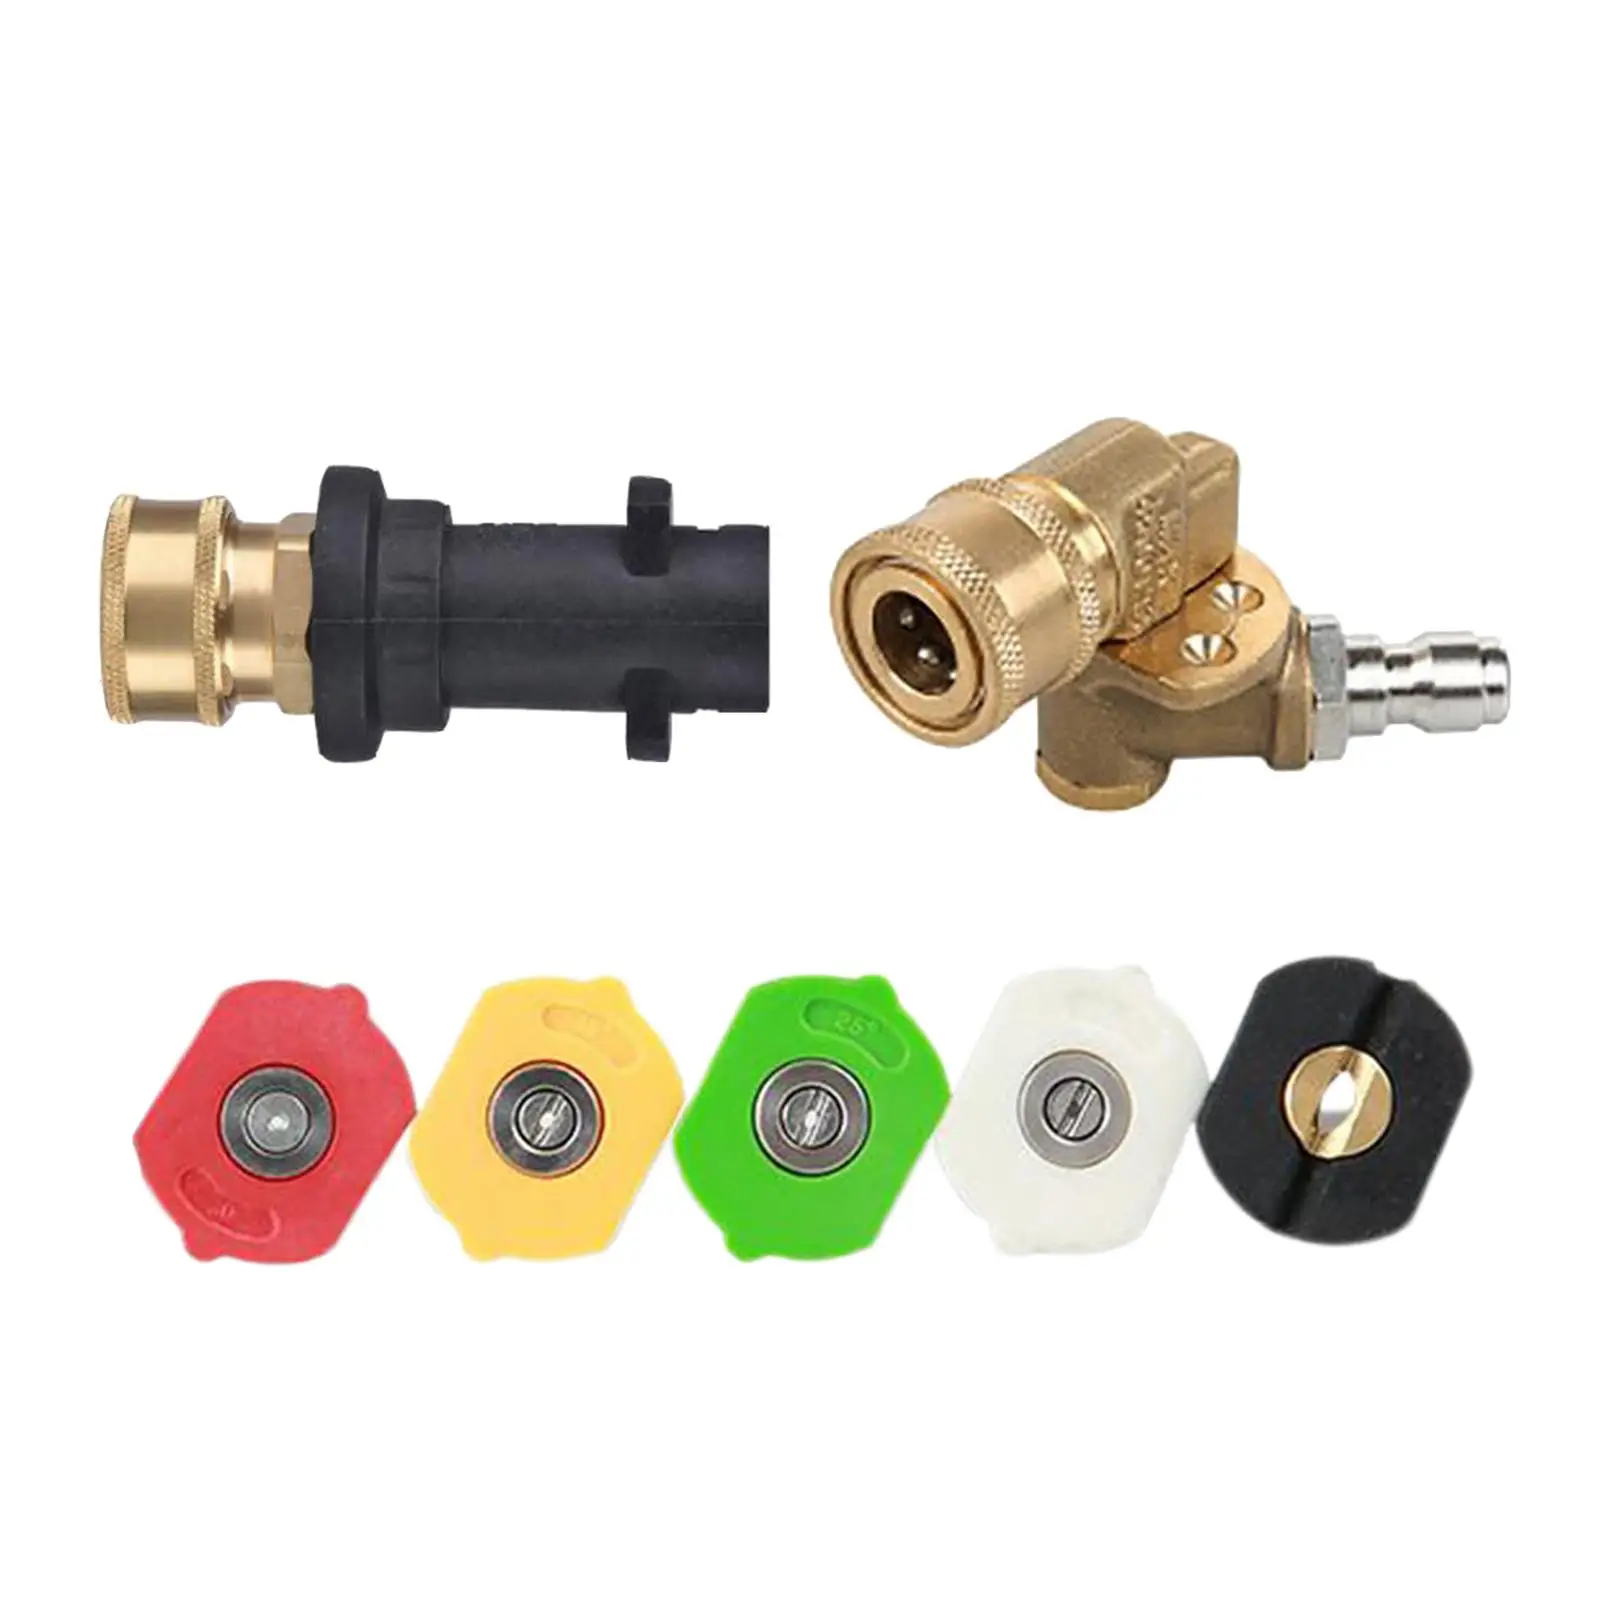 Pressure Washing Adapter Kits Professional Practical Fittings Adjustable 1/4